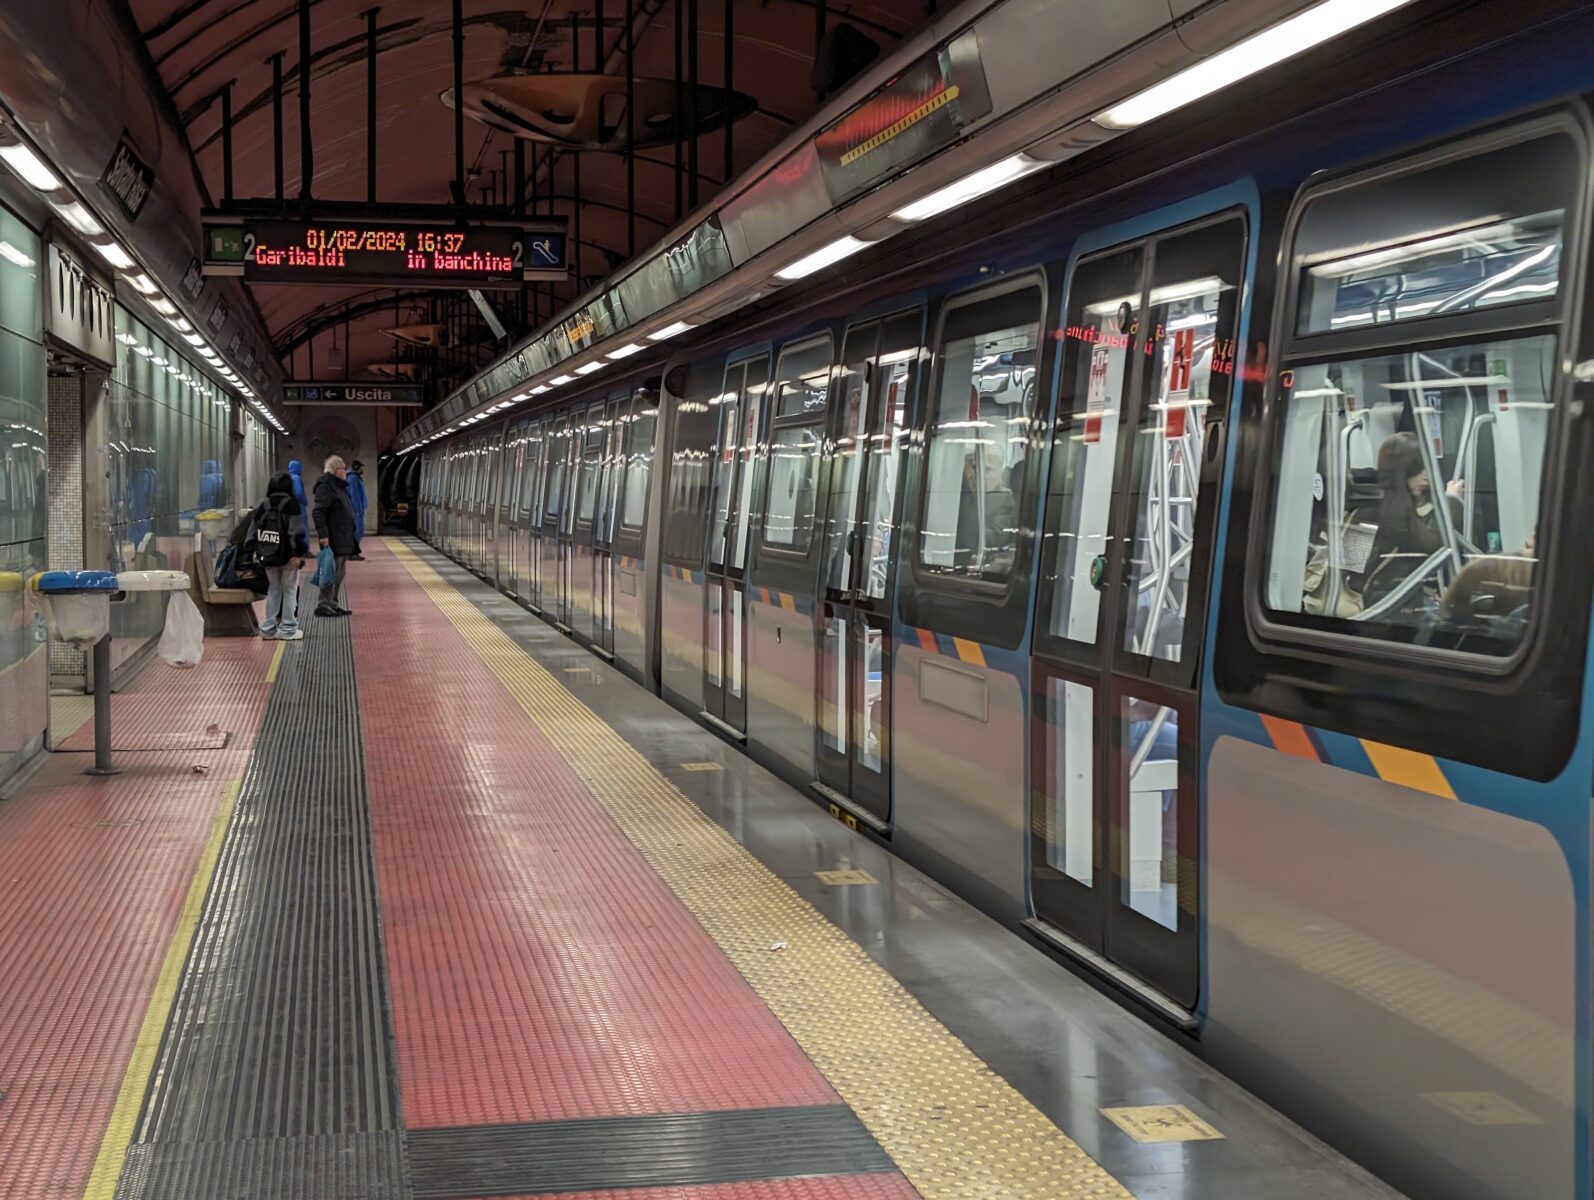 Naples Metro Line 1, early closure on March 27rd